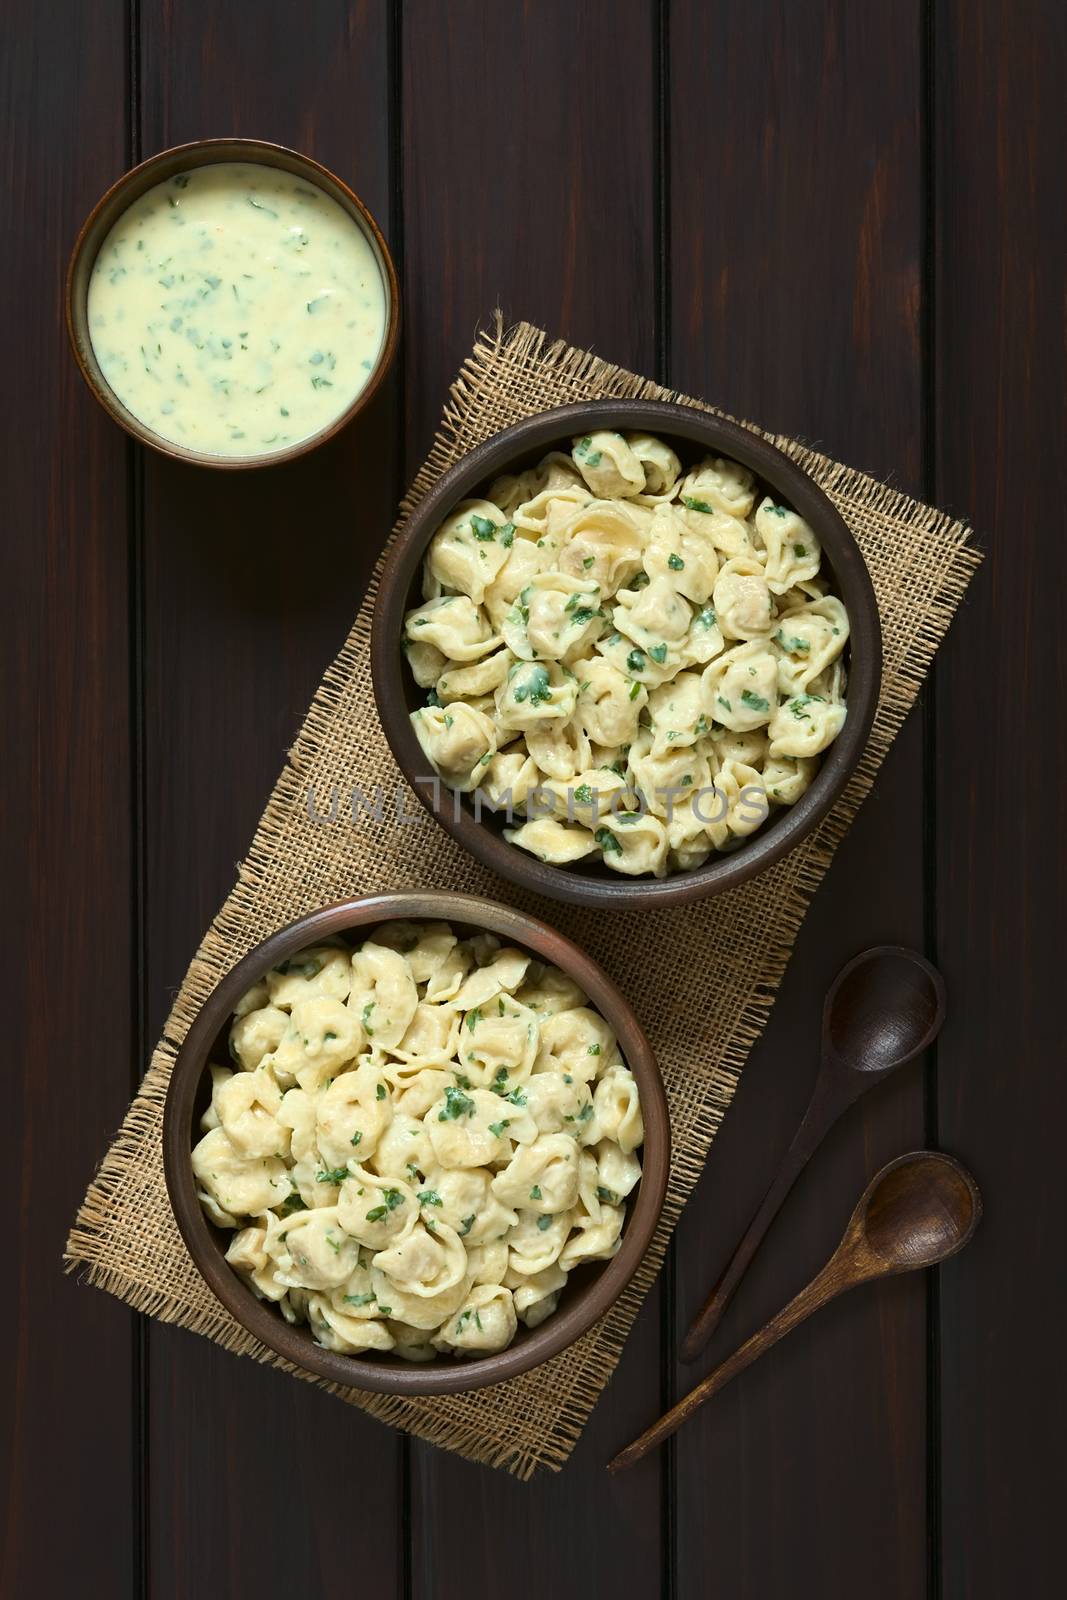 Cooked Tortellini with Parsley Cream Sauce by ildi